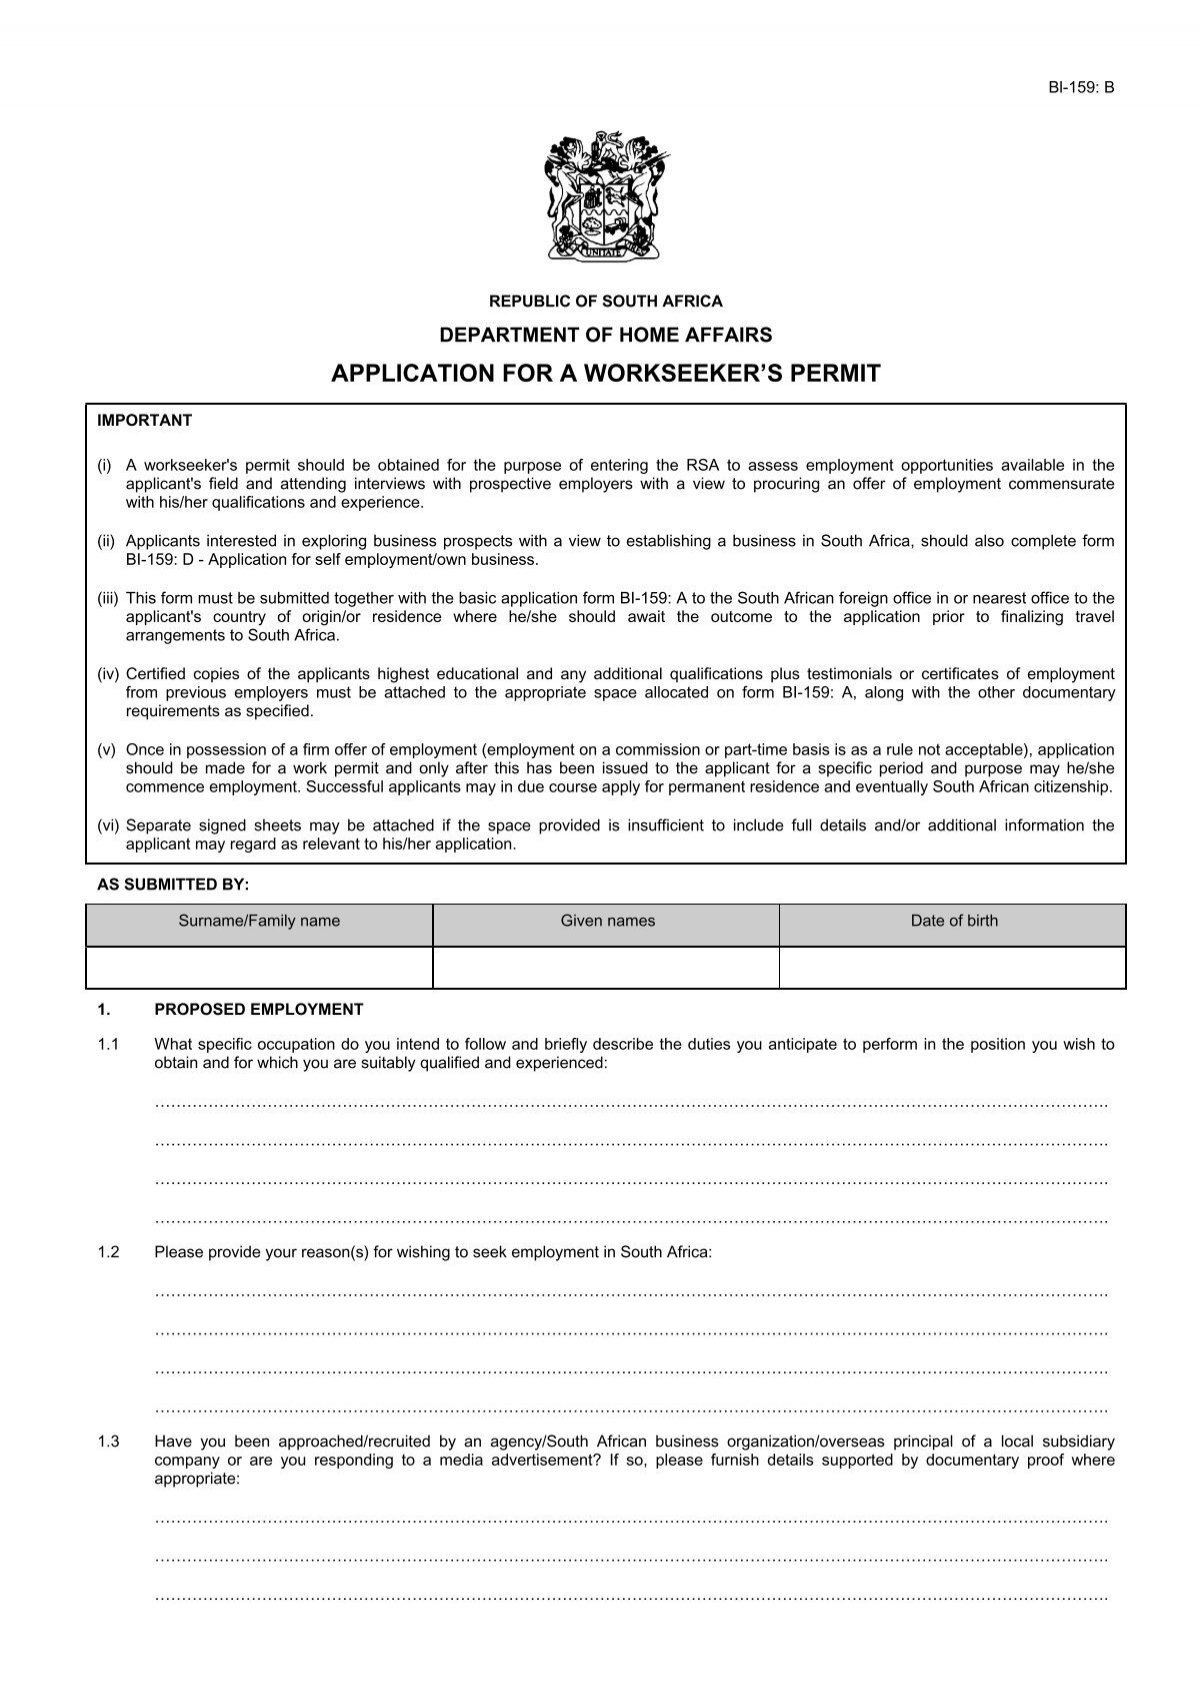 application-for-a-workseeker-s-permit-south-africa